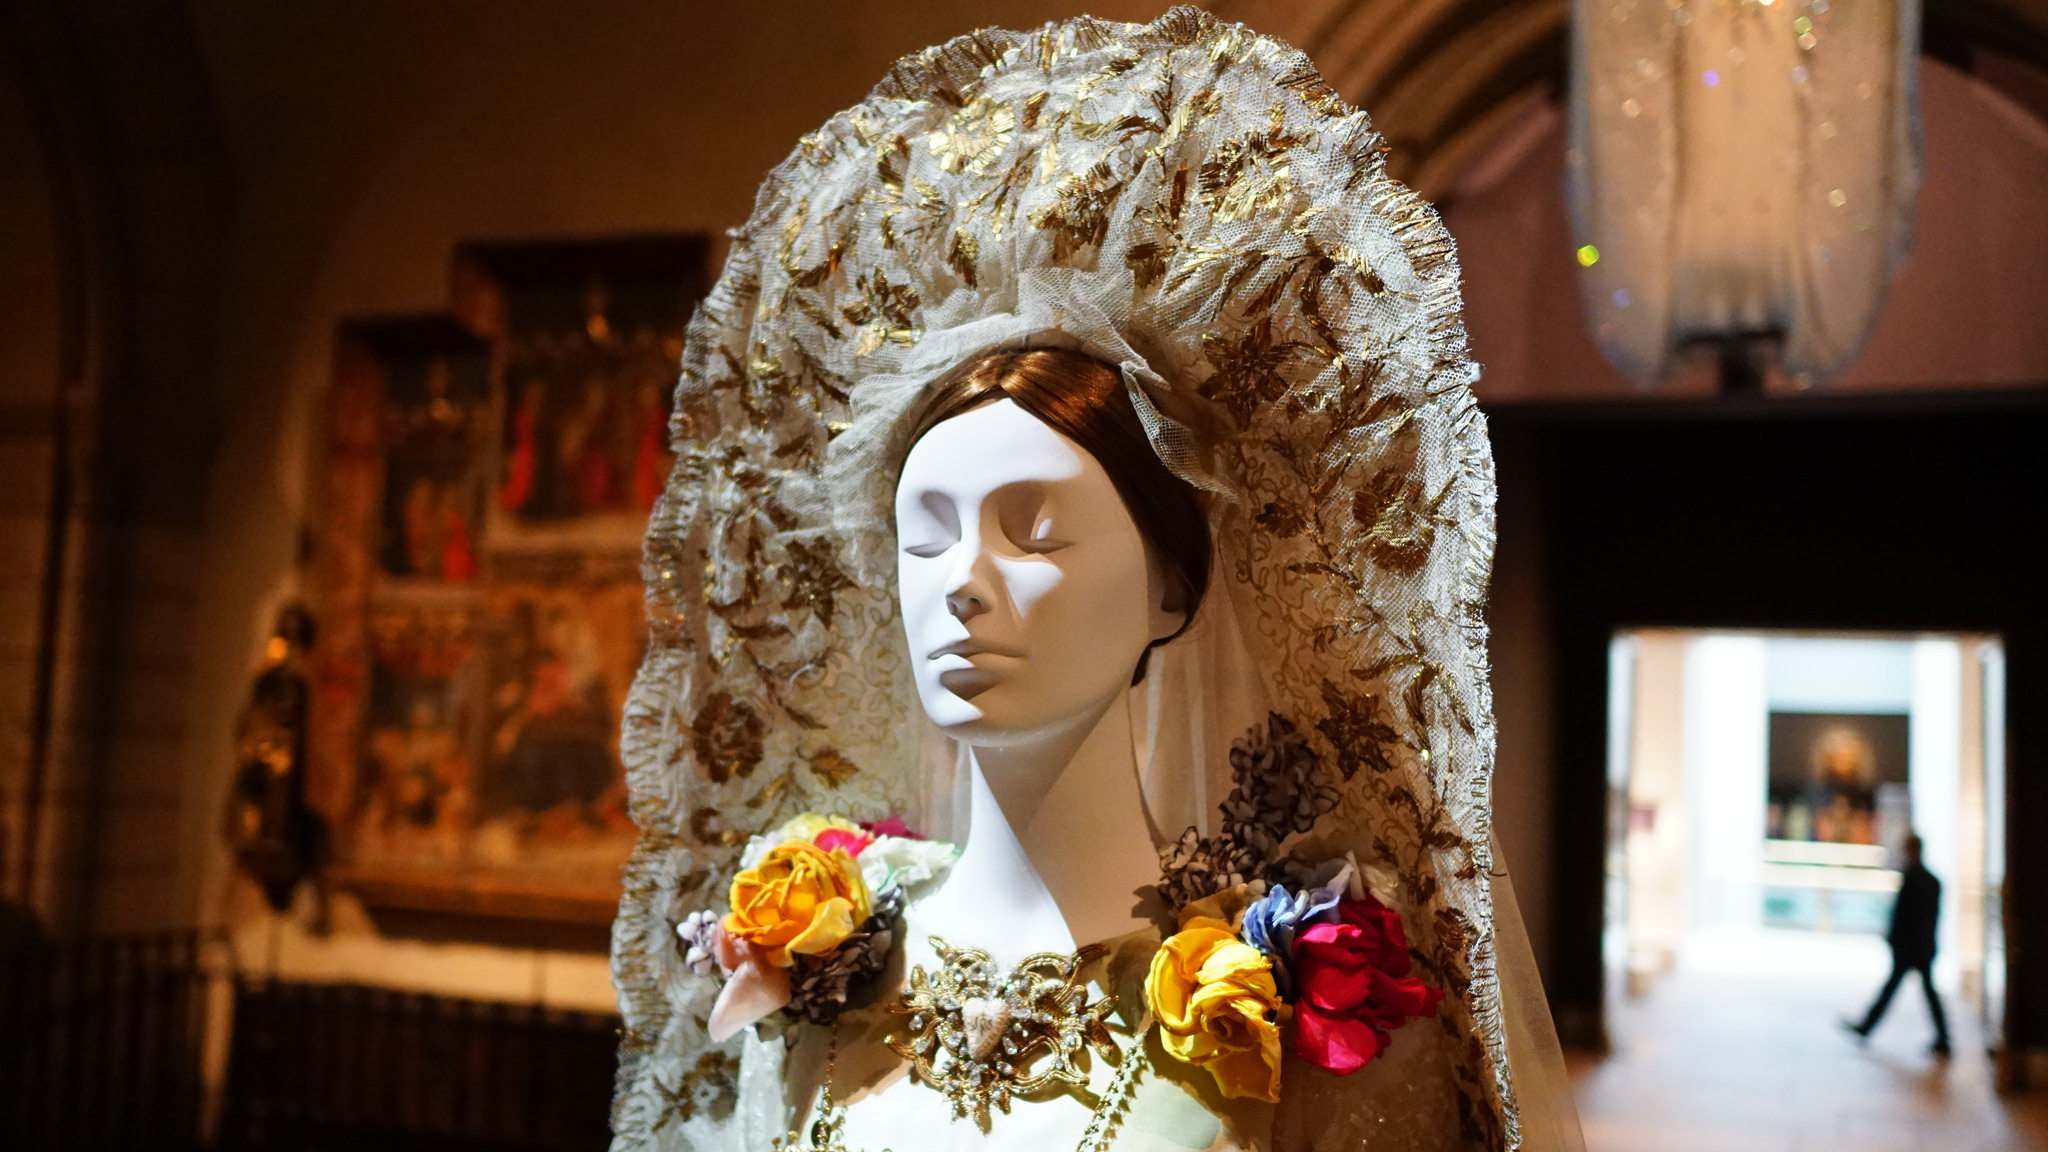 heavenly bodies3 Heavenly Bodies: Fashion and the Catholic Imagination in MET